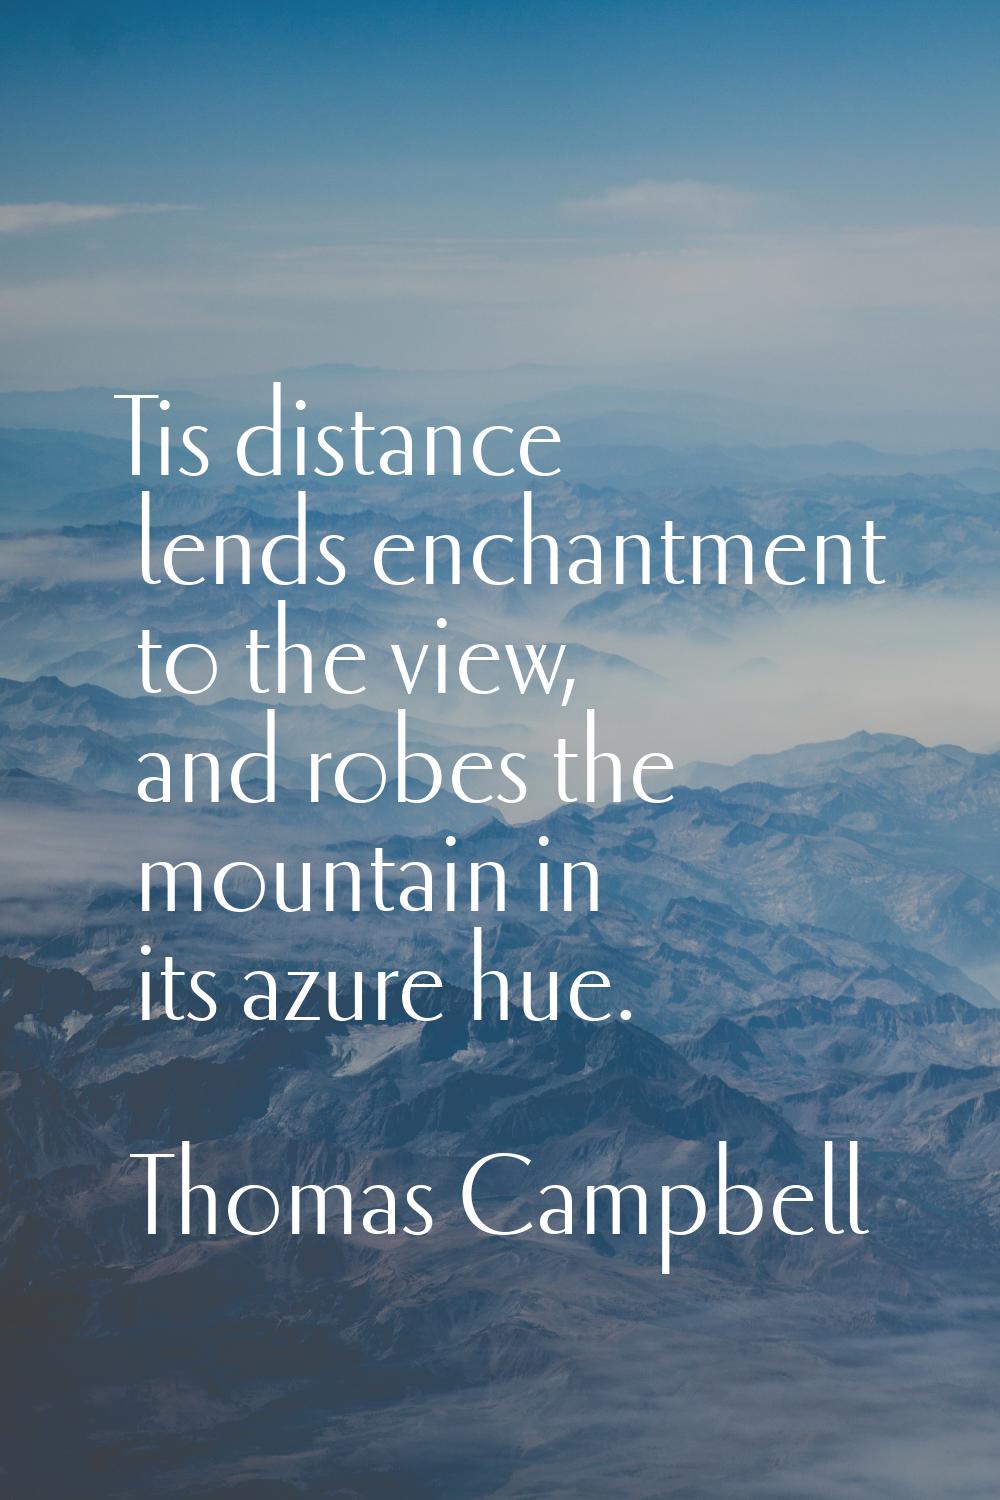 Tis distance lends enchantment to the view, and robes the mountain in its azure hue.